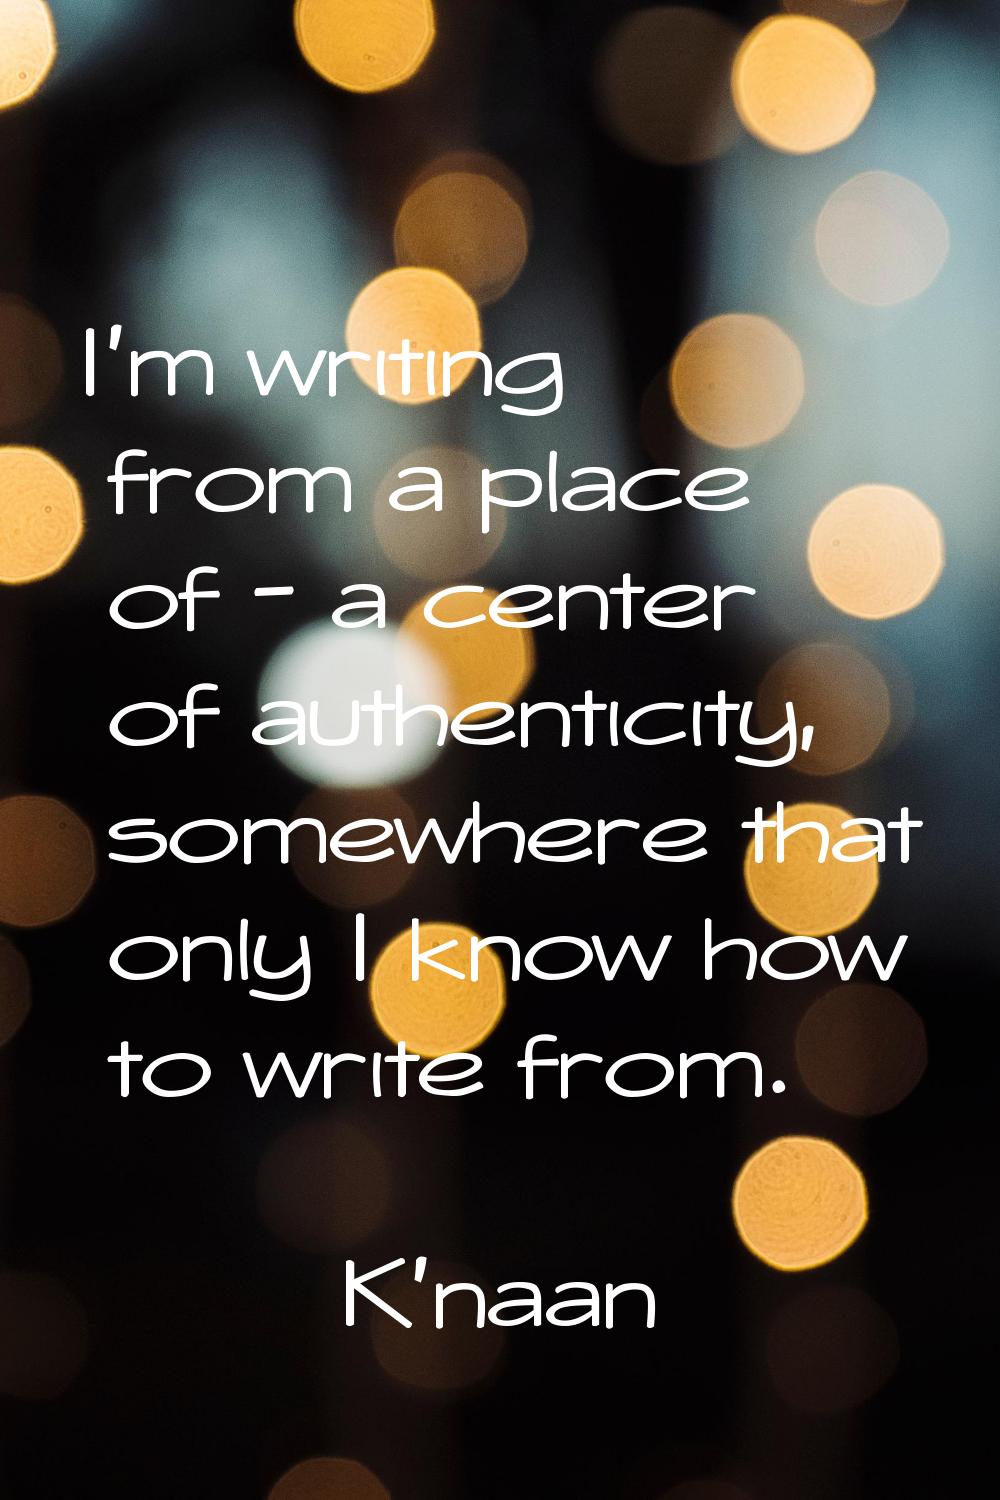 I'm writing from a place of - a center of authenticity, somewhere that only I know how to write fro